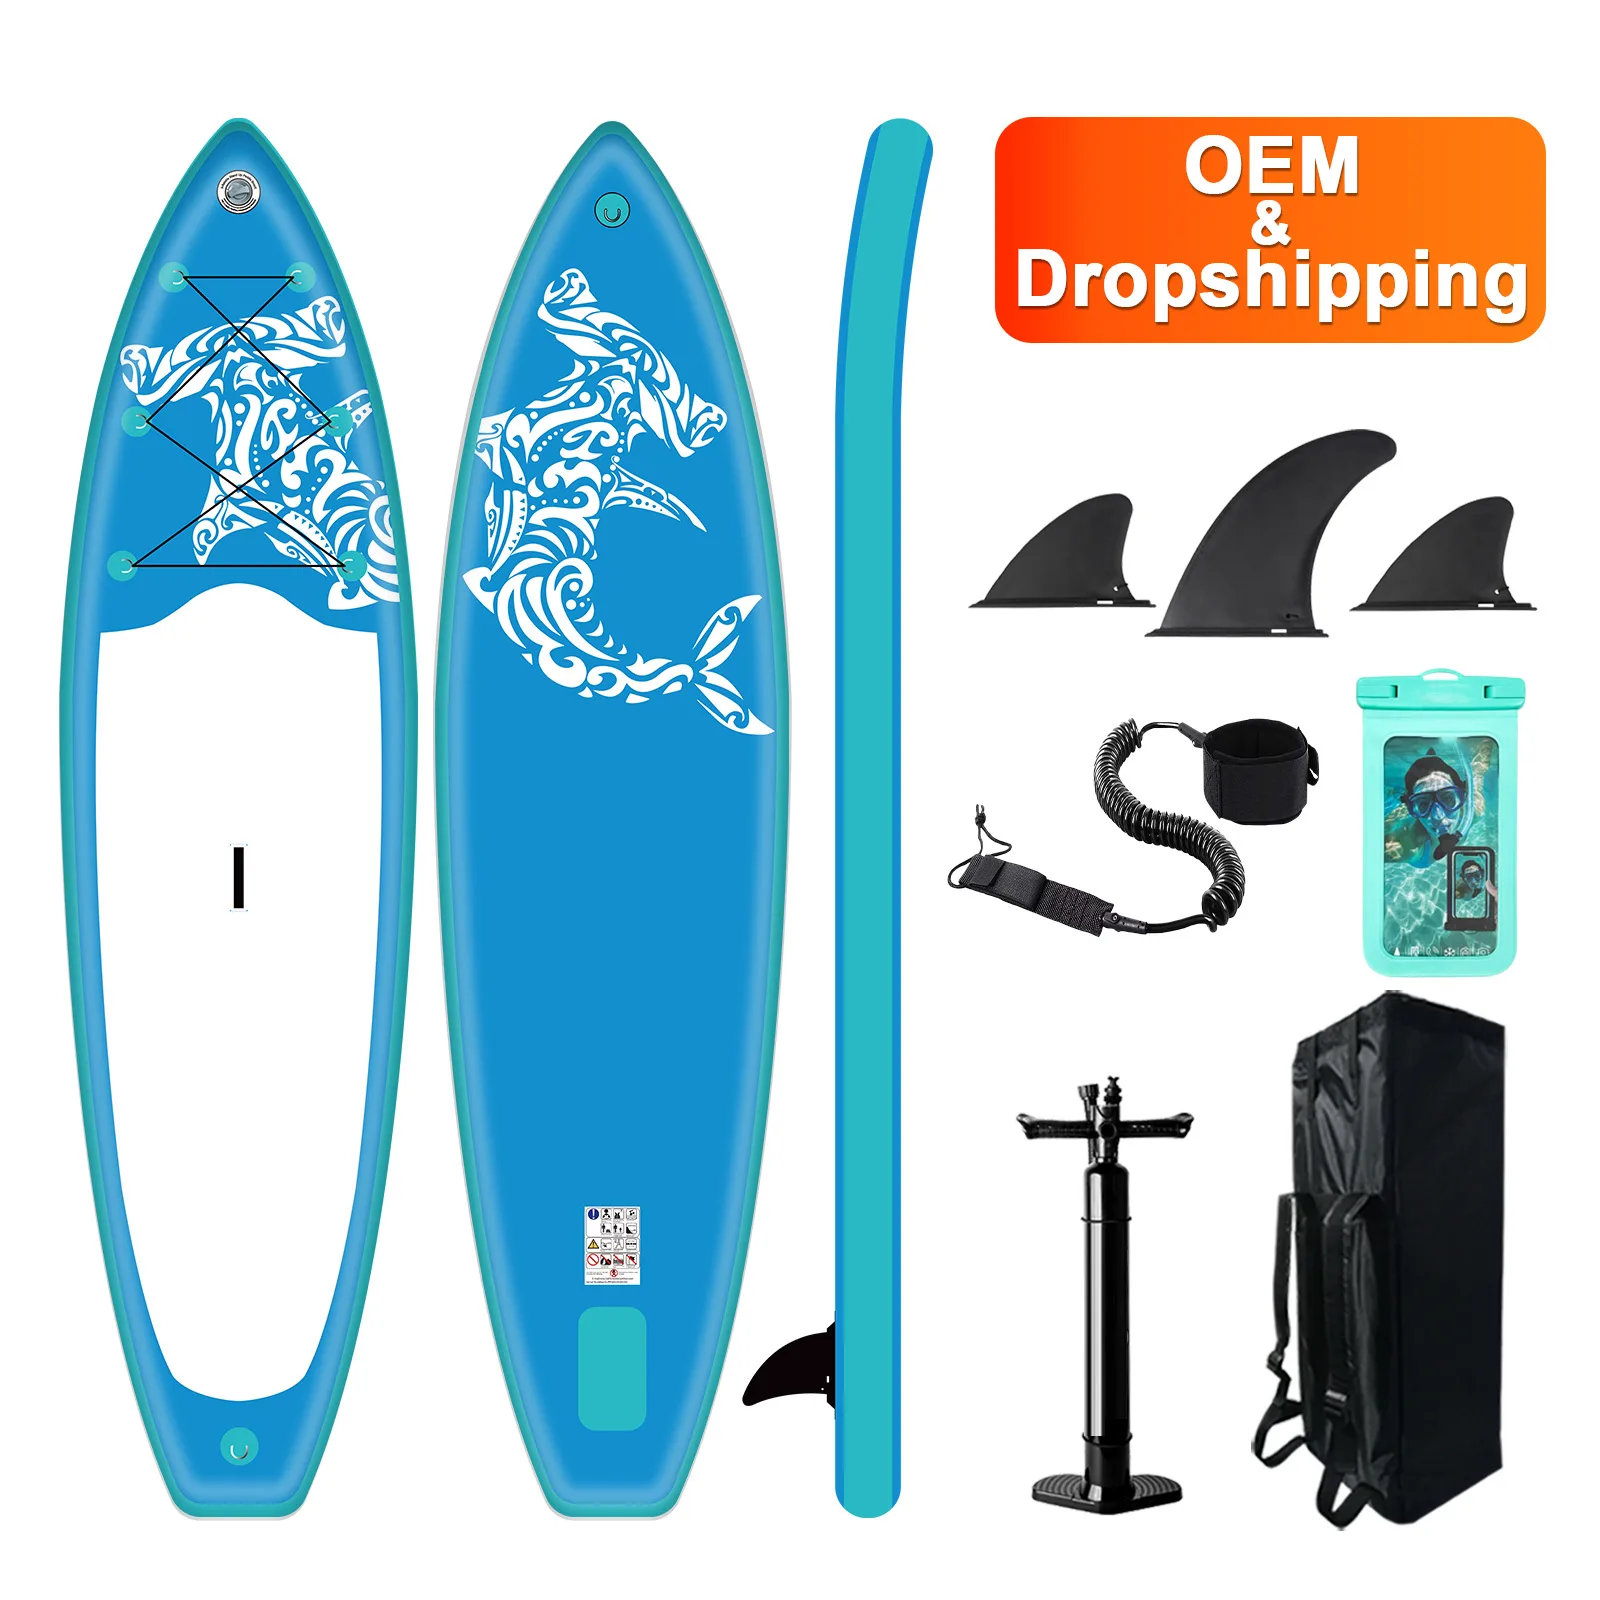 

FUNWATER Dropshipping OEM Wholesale blue stand up paddle board surfboard inflatable sup supboard wakeboard watersports fanatics